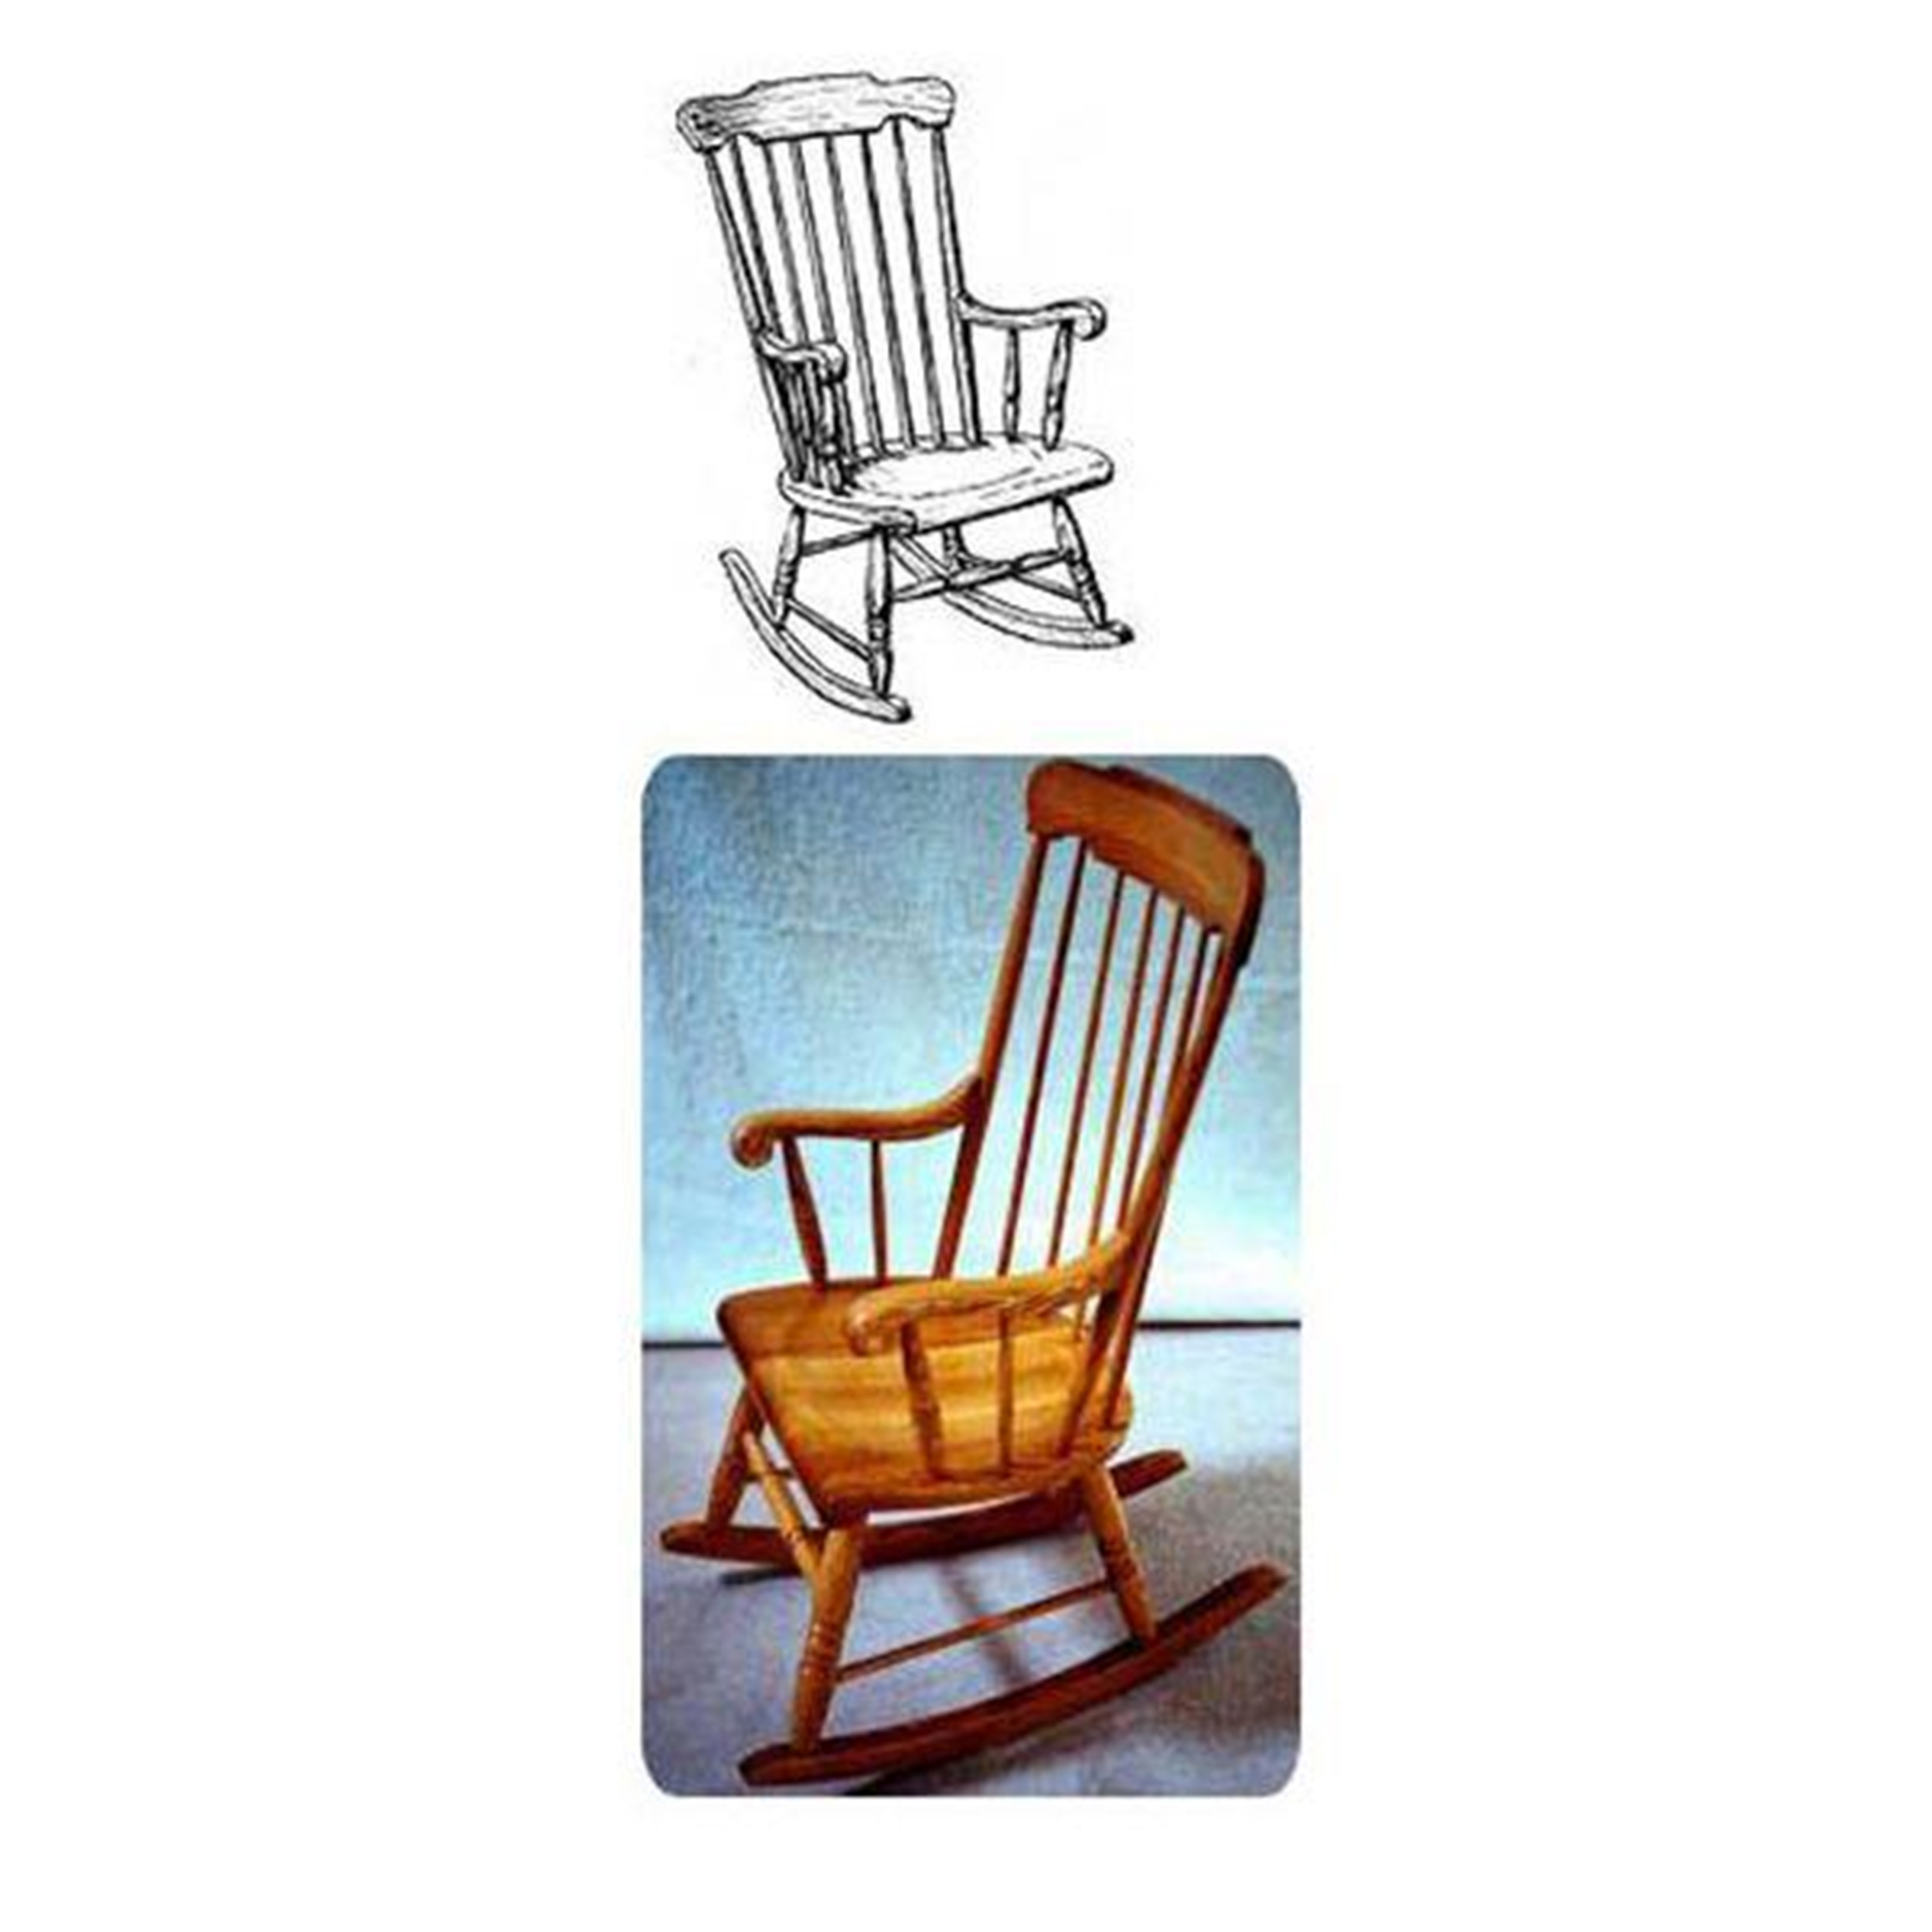 Woodworking Project Paper Plan To Build Boston Rocking Chair